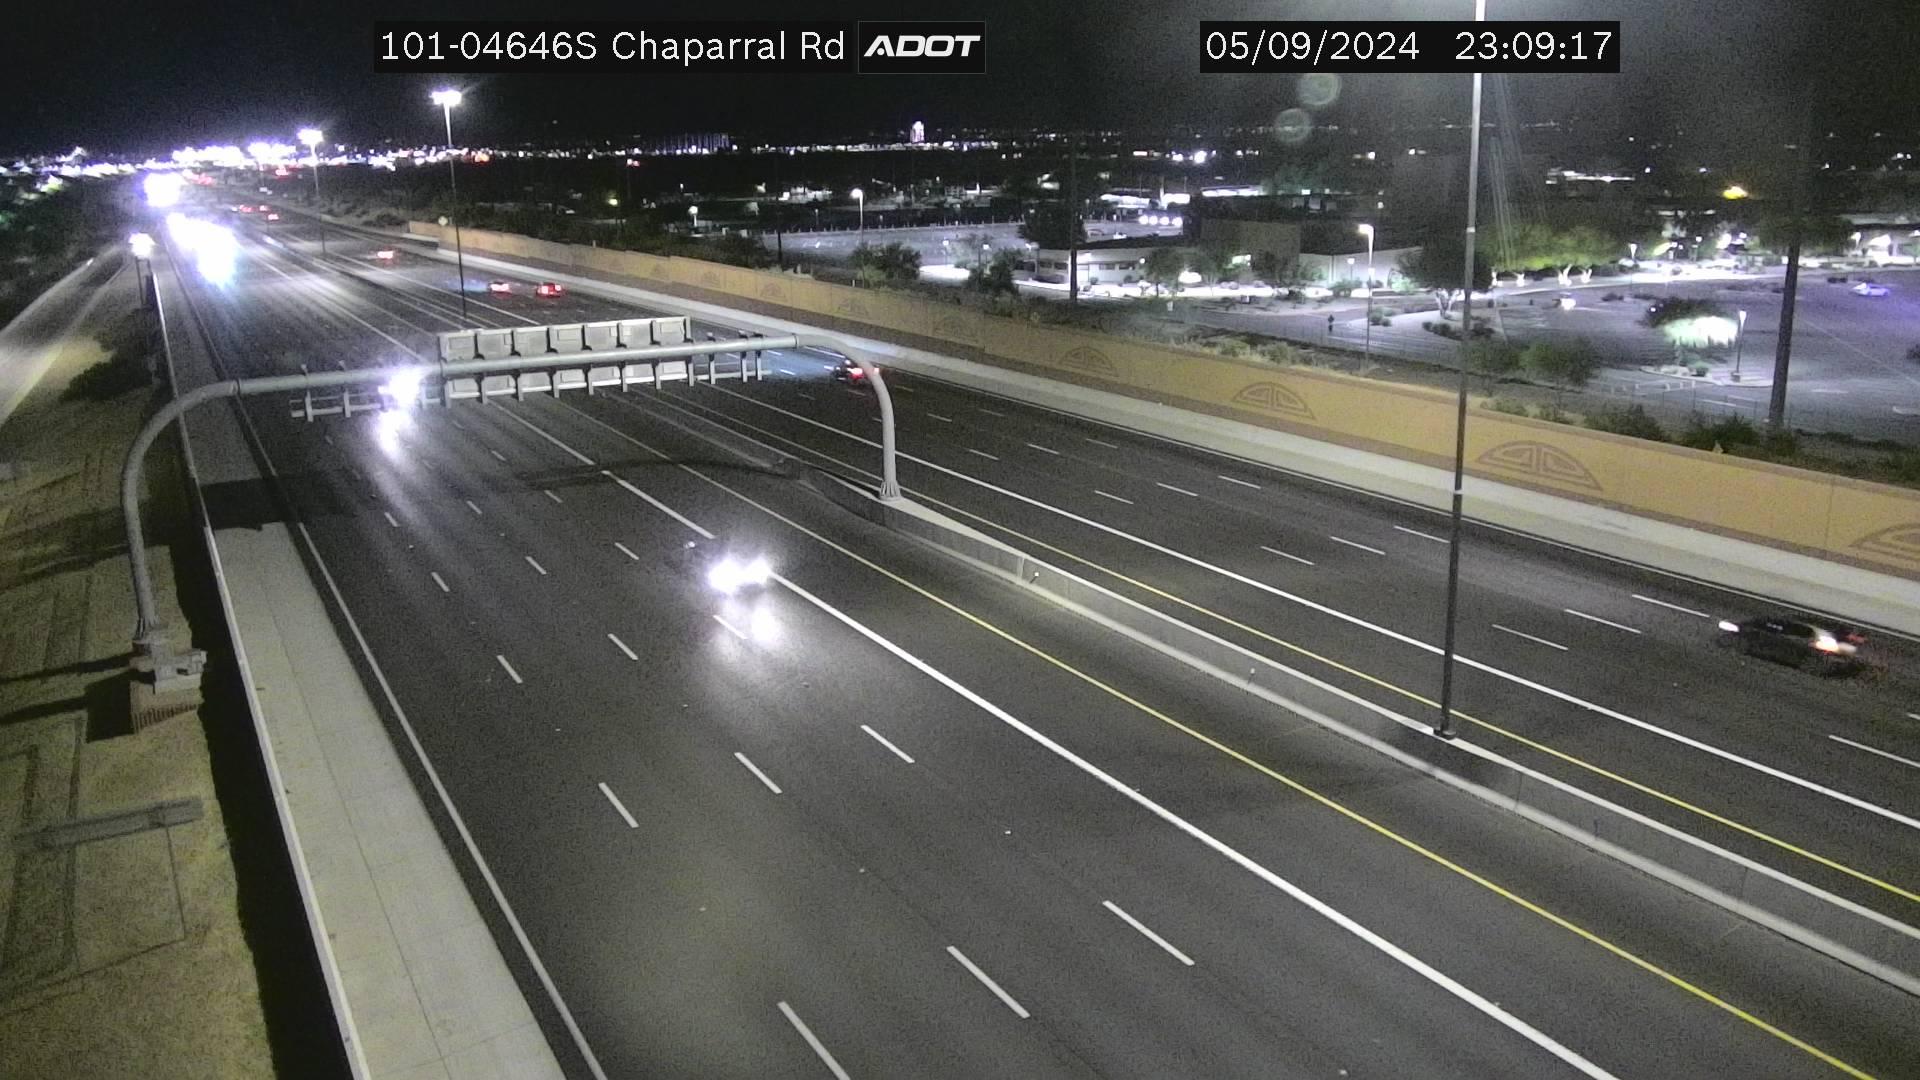 Paradise Valley › South: L-101 SB 46.42 @Chaparral Traffic Camera